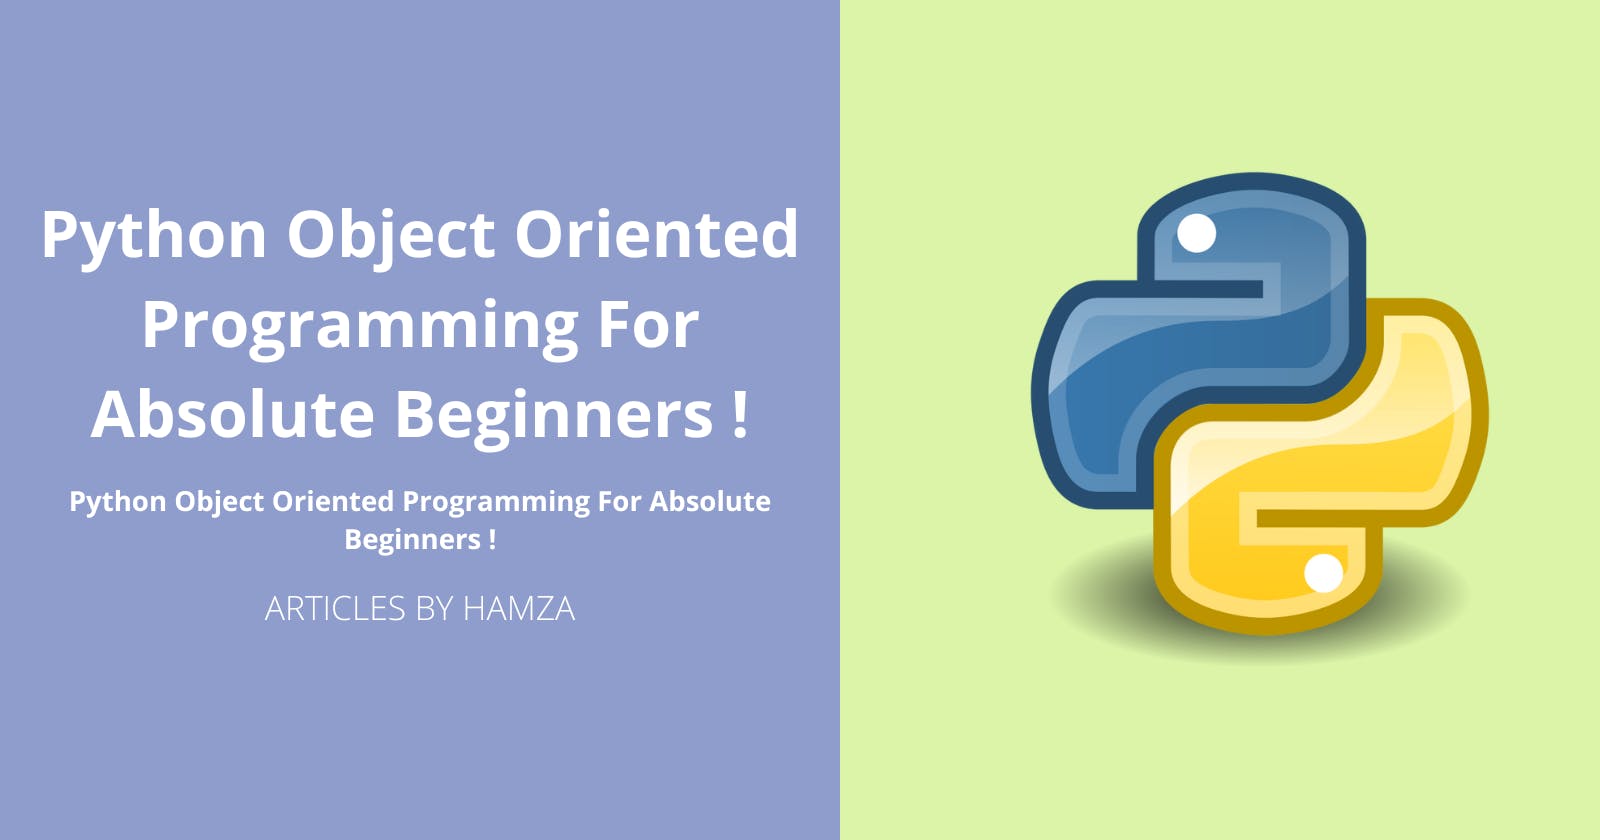 Mastering Object-Oriented Programming in Python: A Beginner's Guide!